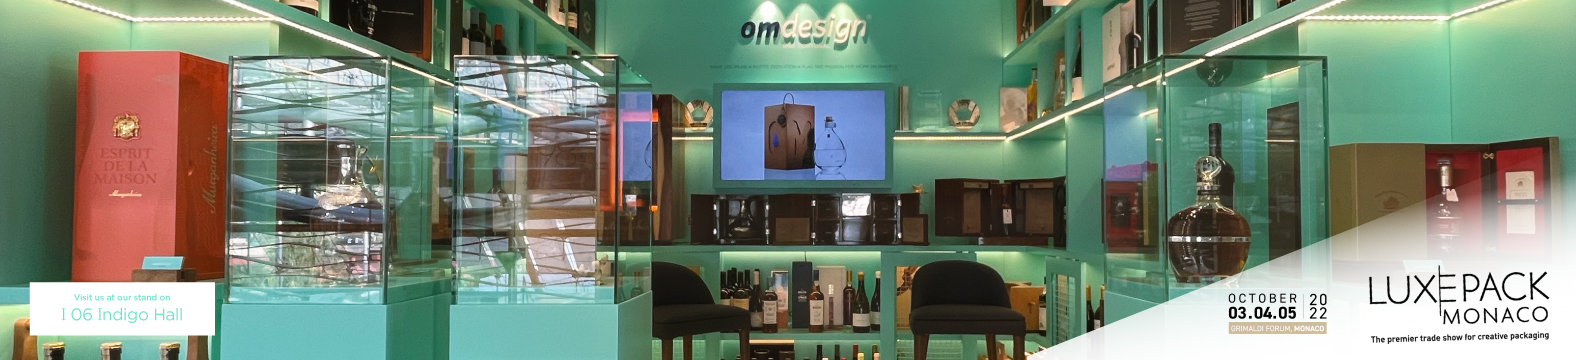 Omdesign's sustainability and excellence at Luxe Pack Monaco 2022